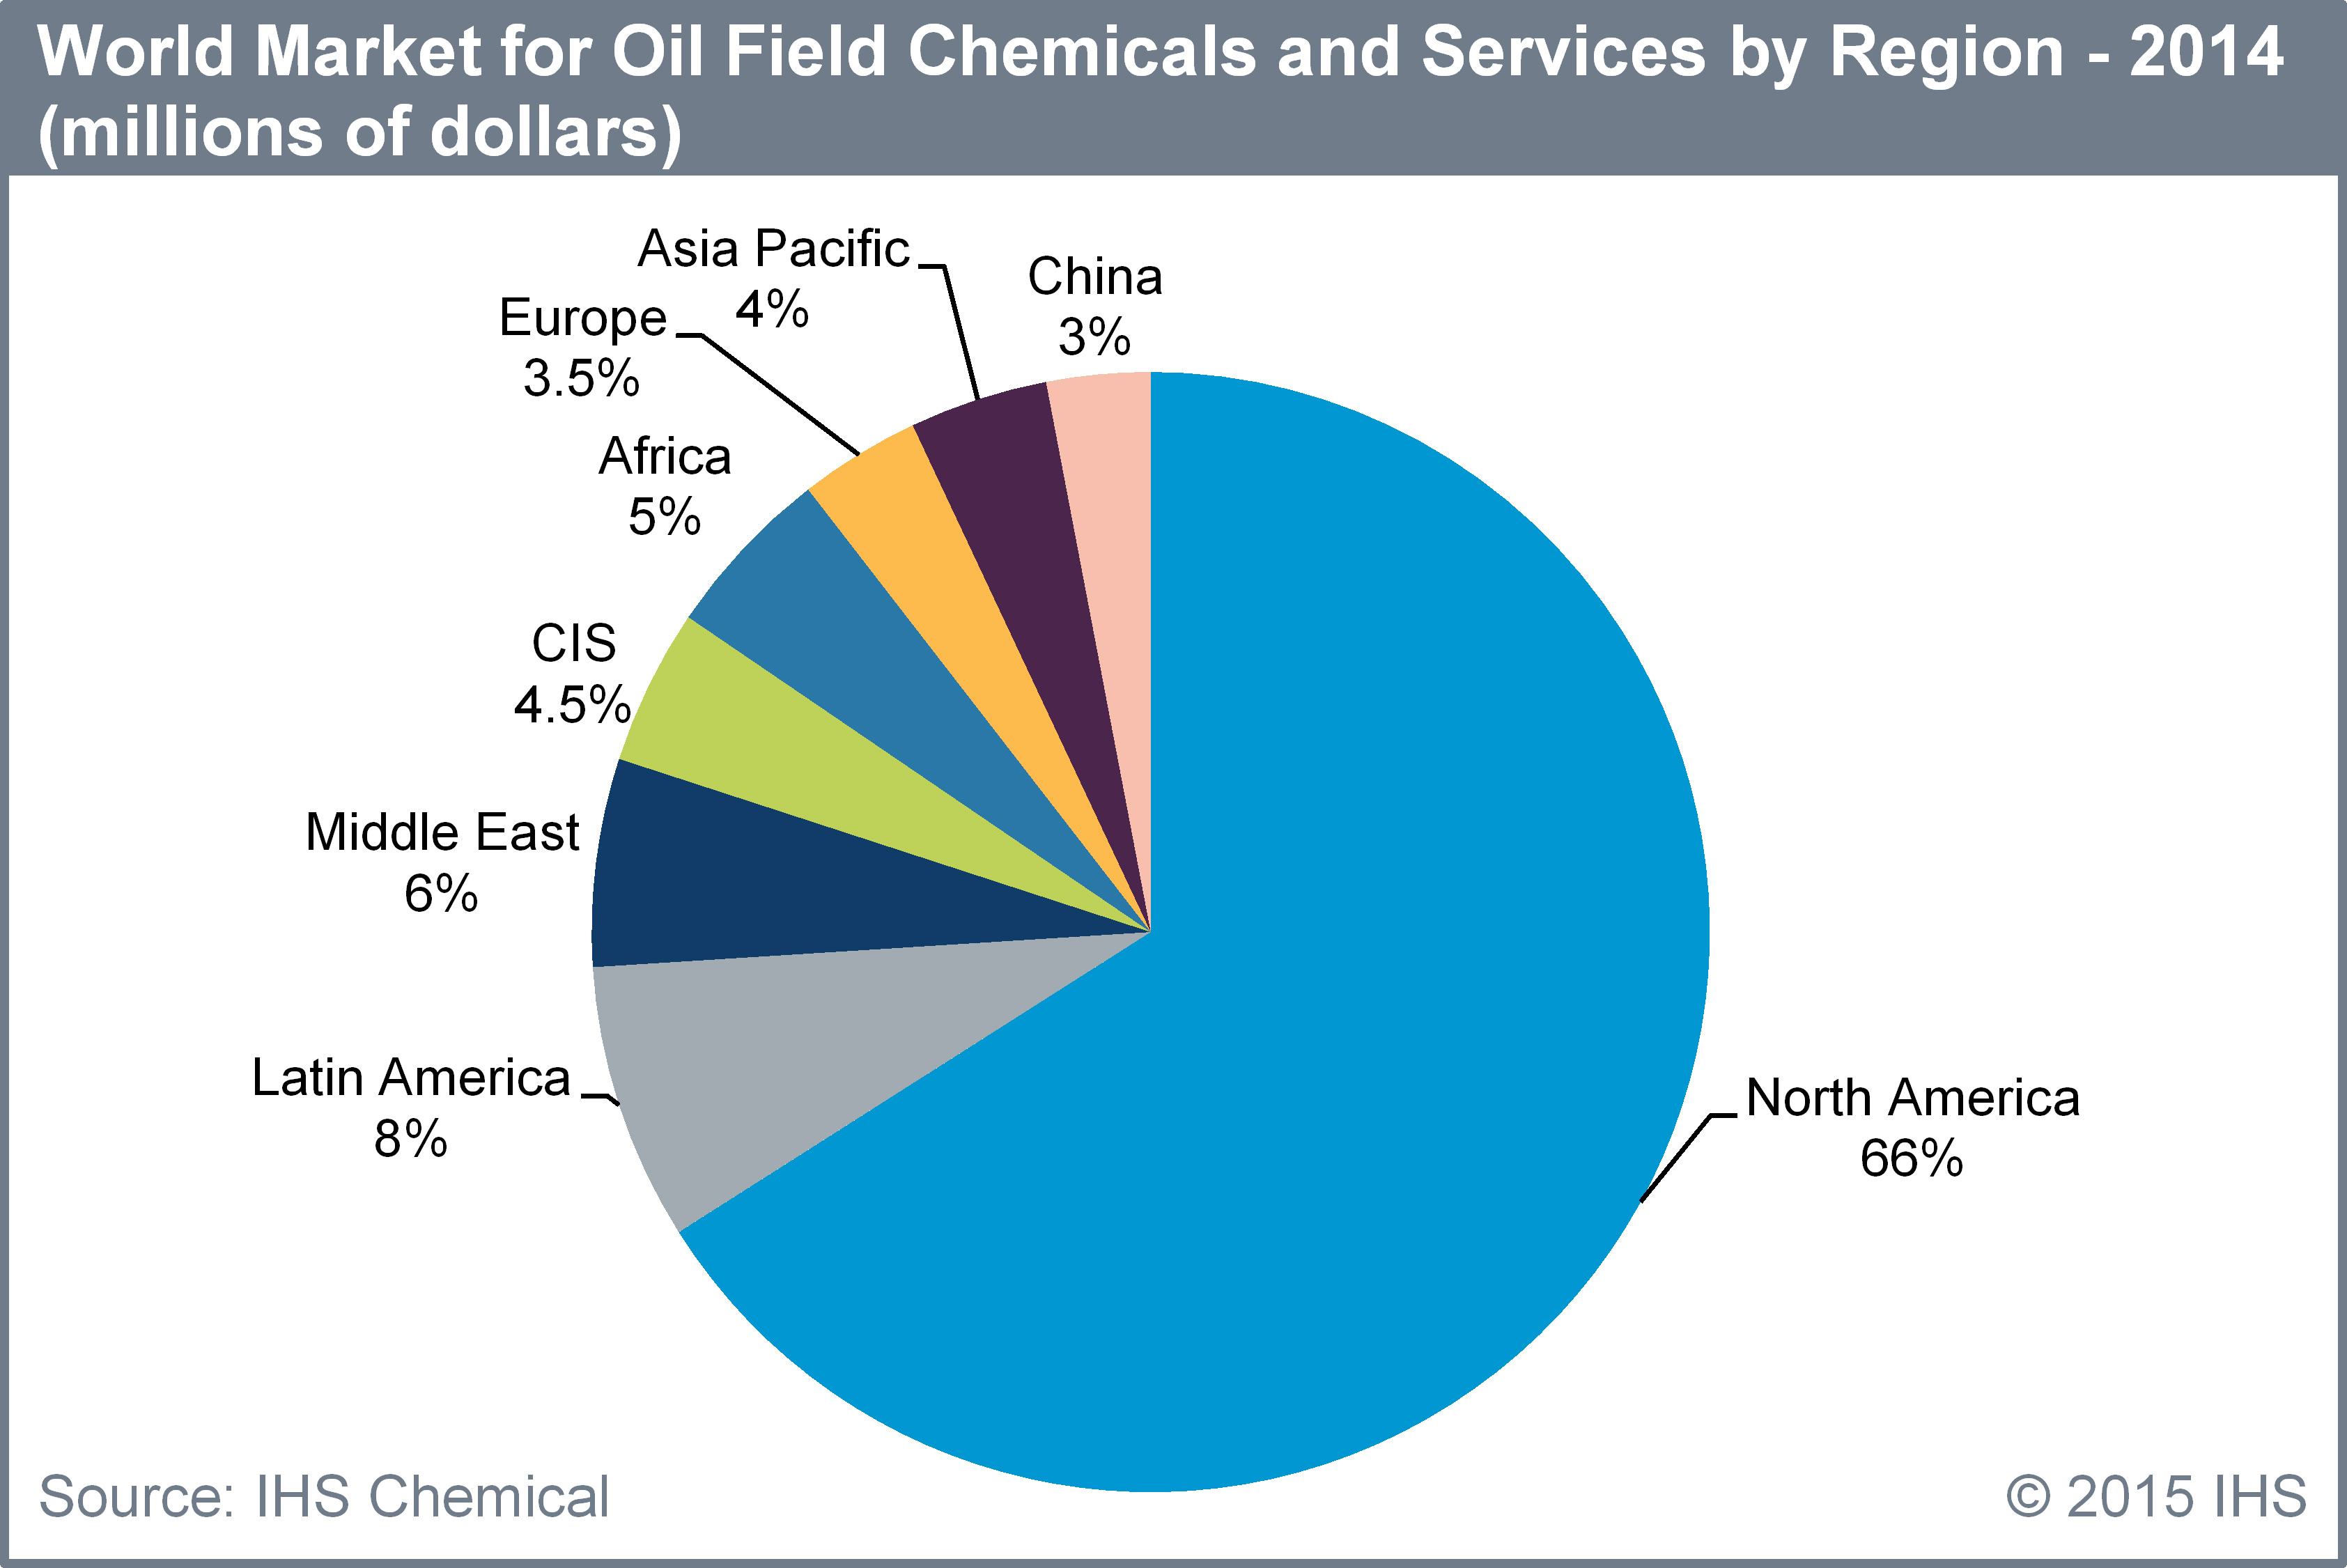 World market is. World Oil Market share. North America Market. Fields of Chemistry. Oil and Metals Exports by Latin America.